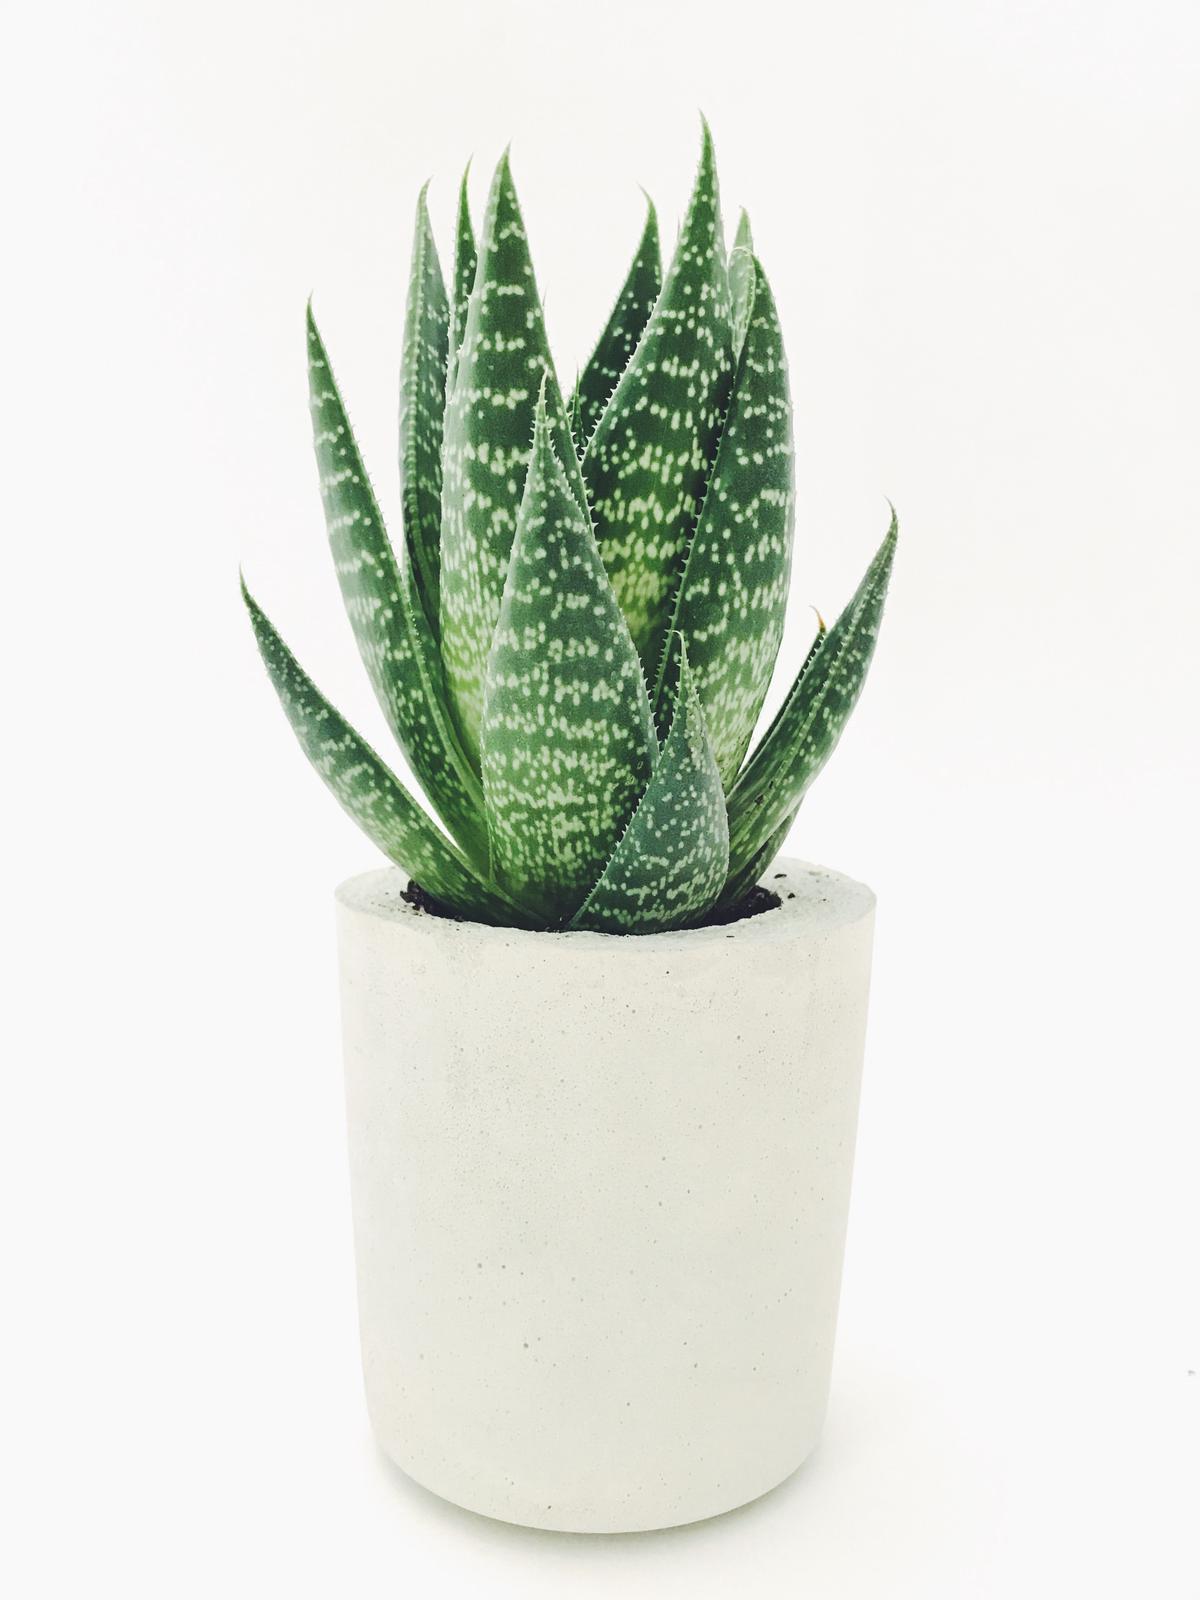 A potted Aloe Vera plant with vibrant green leaves and spiky edges, illustration of healthy and flourishing plant